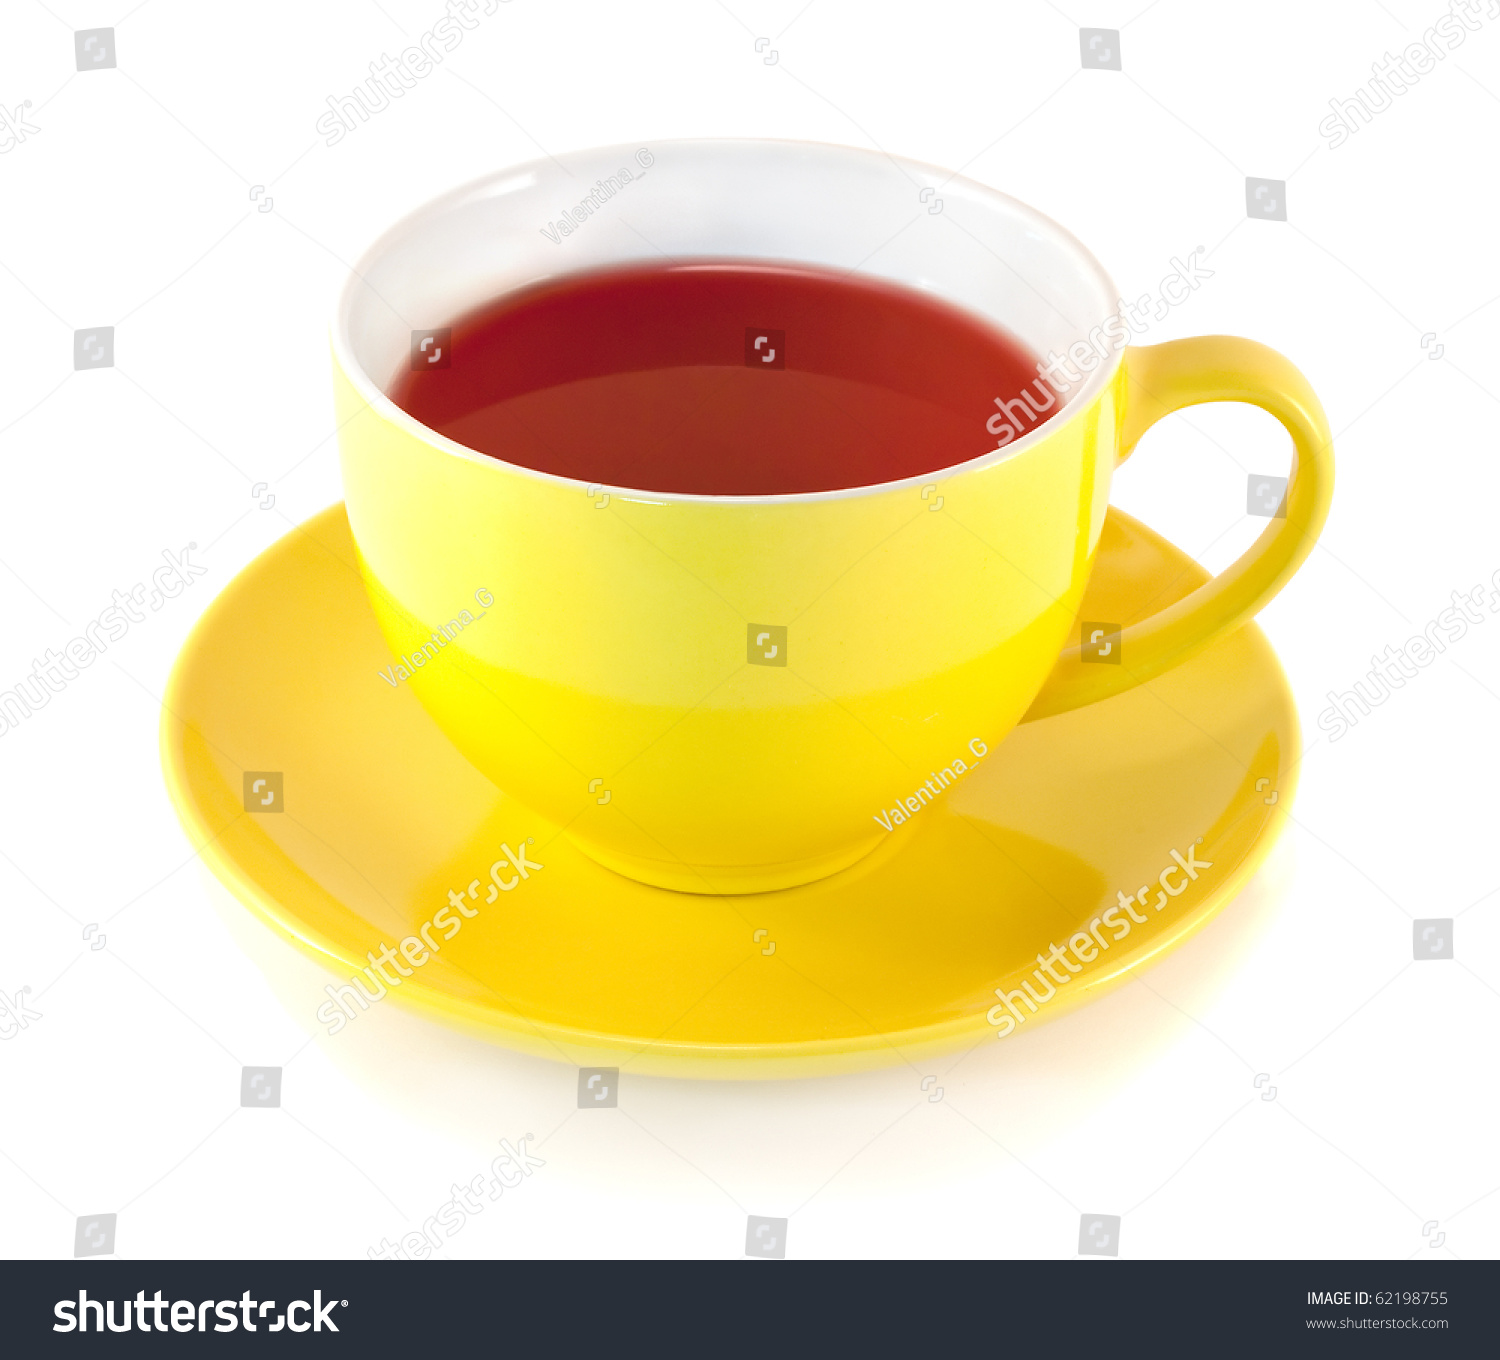 Tea Yellow Cup On White Background Stock Photo (Royalty Free ...